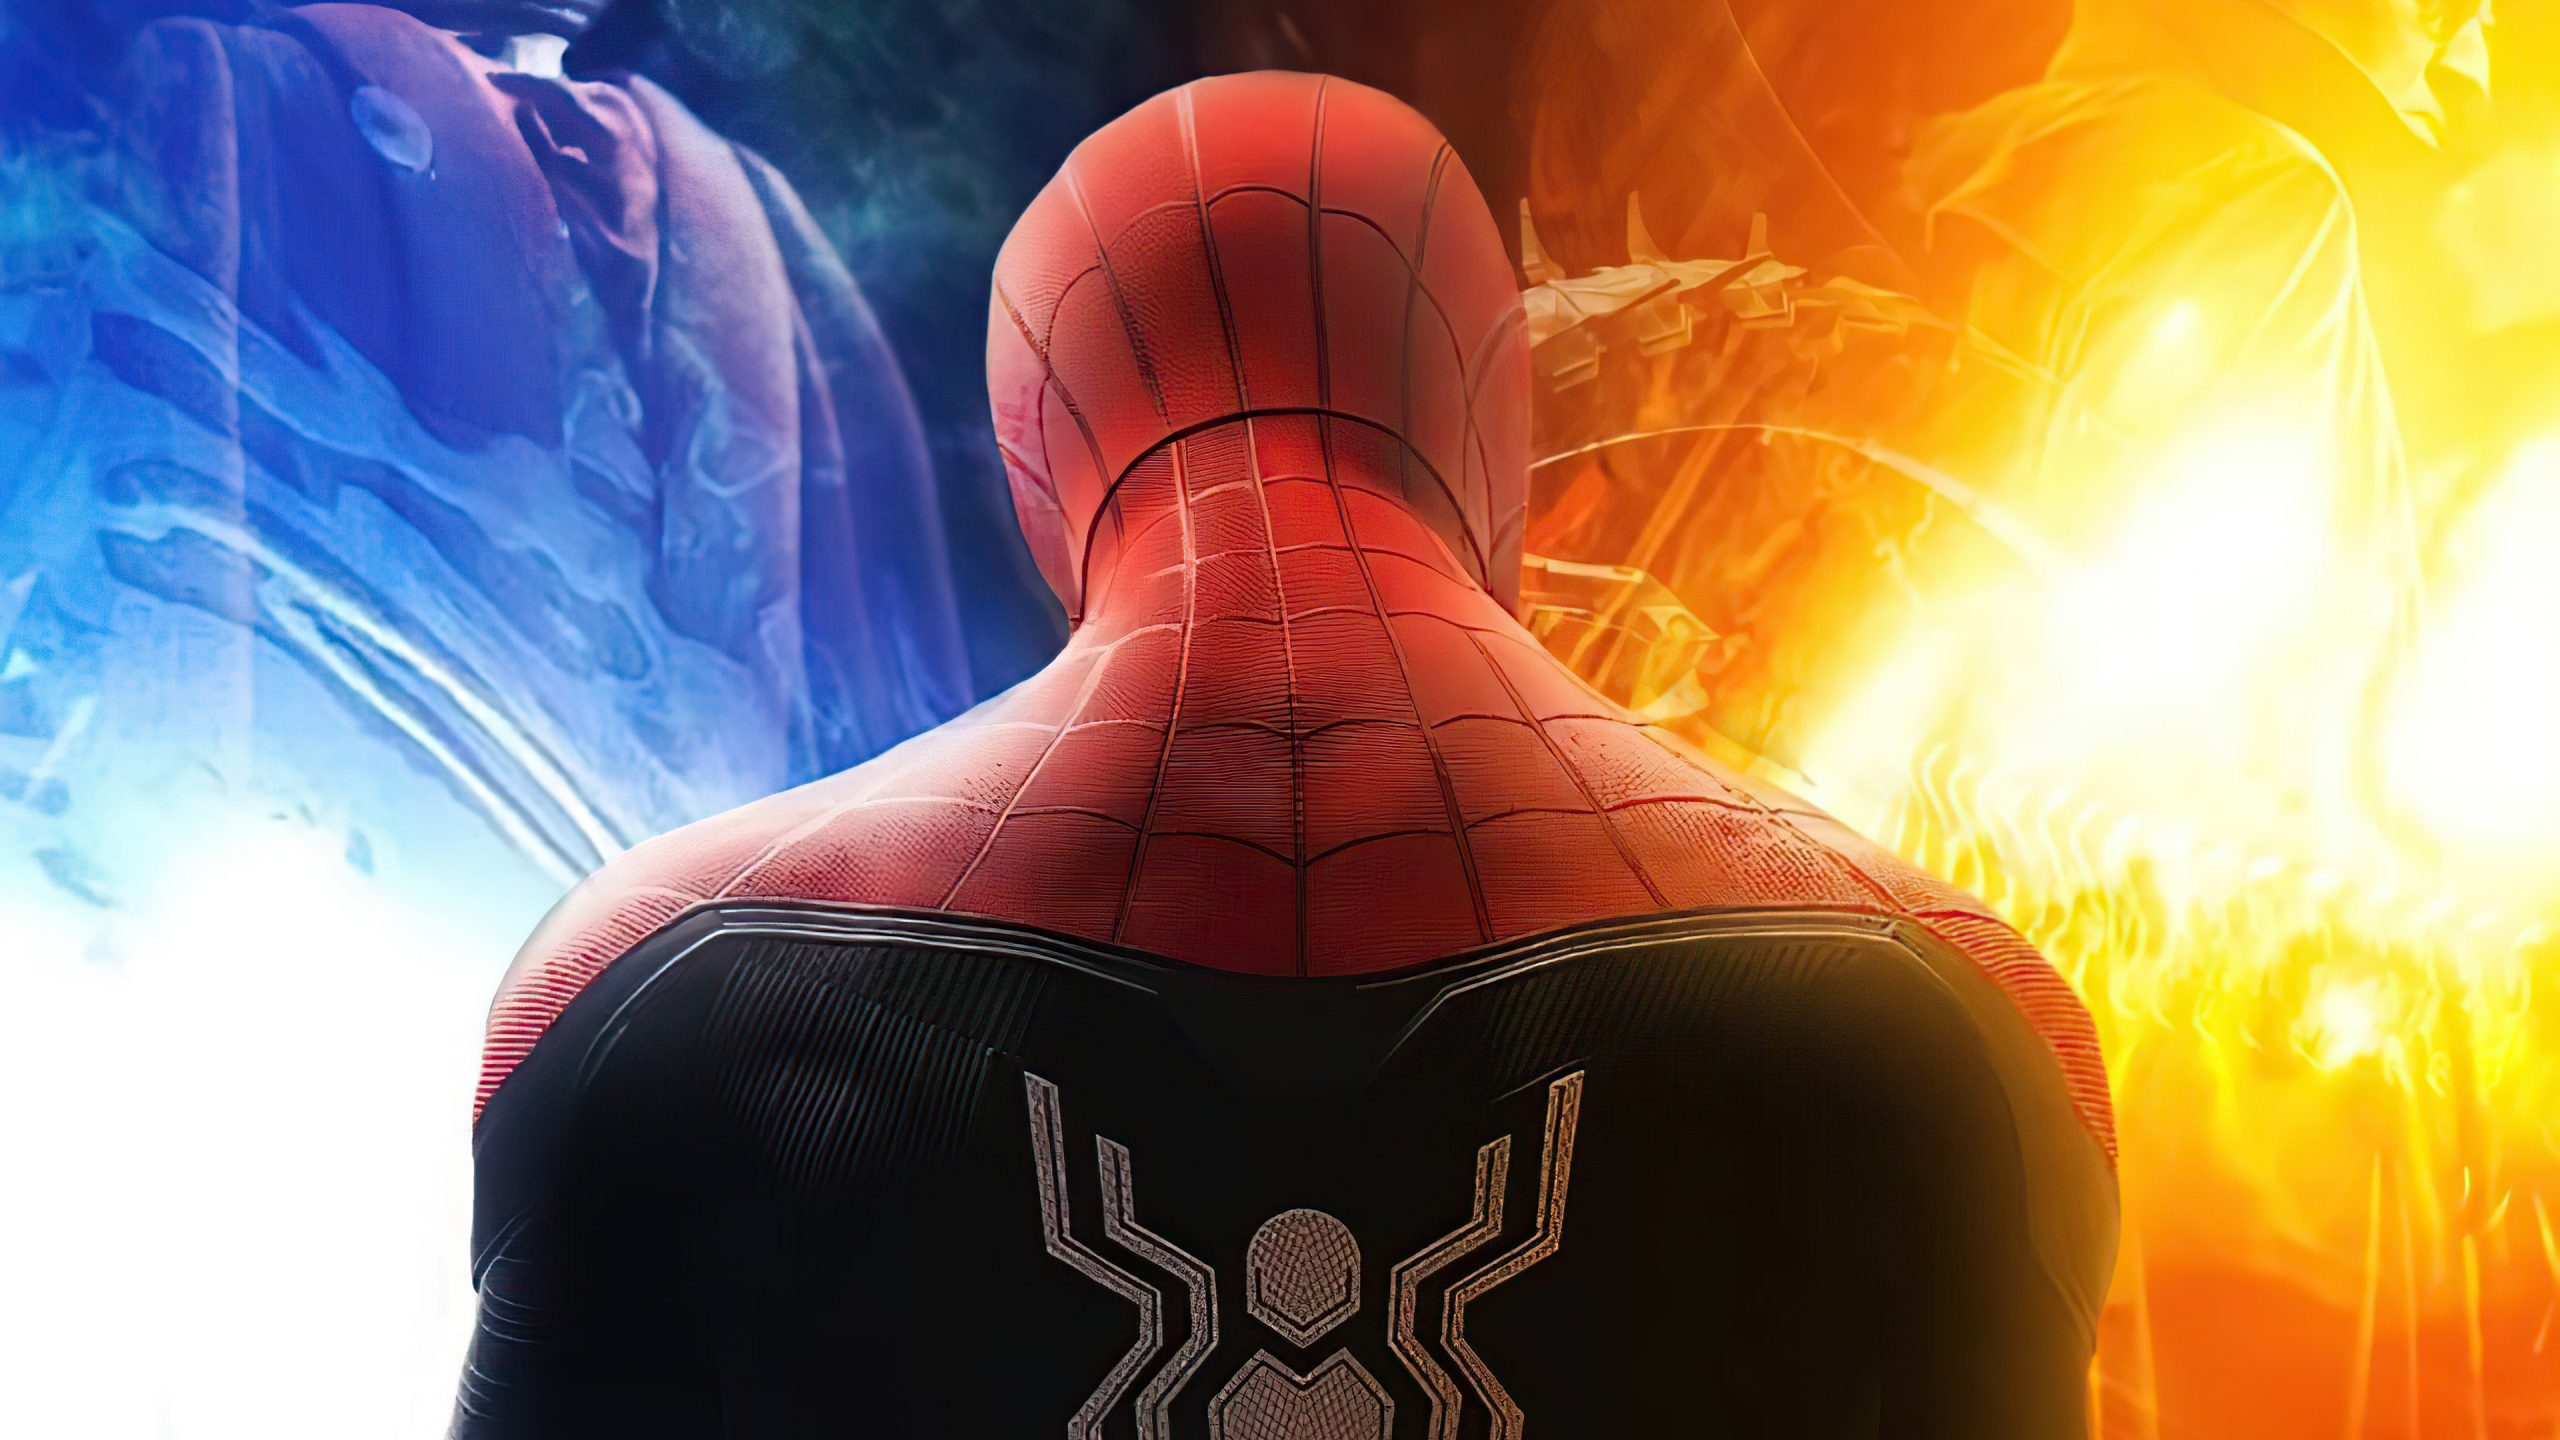 Marvel Cinemas Spider-Man No Way Home leaked online along with its release in theatres